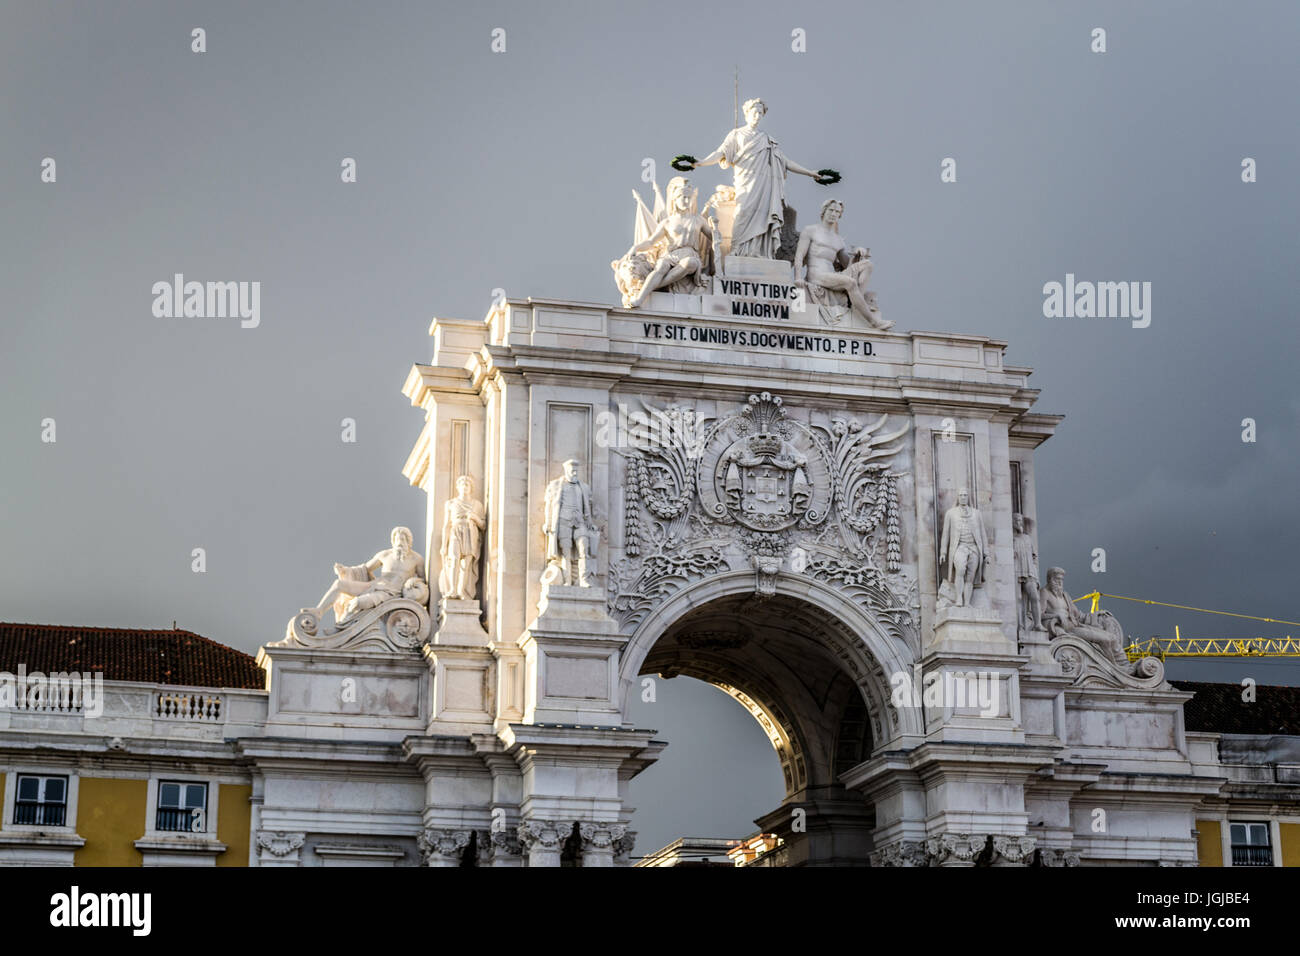 Praca do Comercio in Lisbon by the Tagus river is one of the most iconic areas of the city Stock Photo